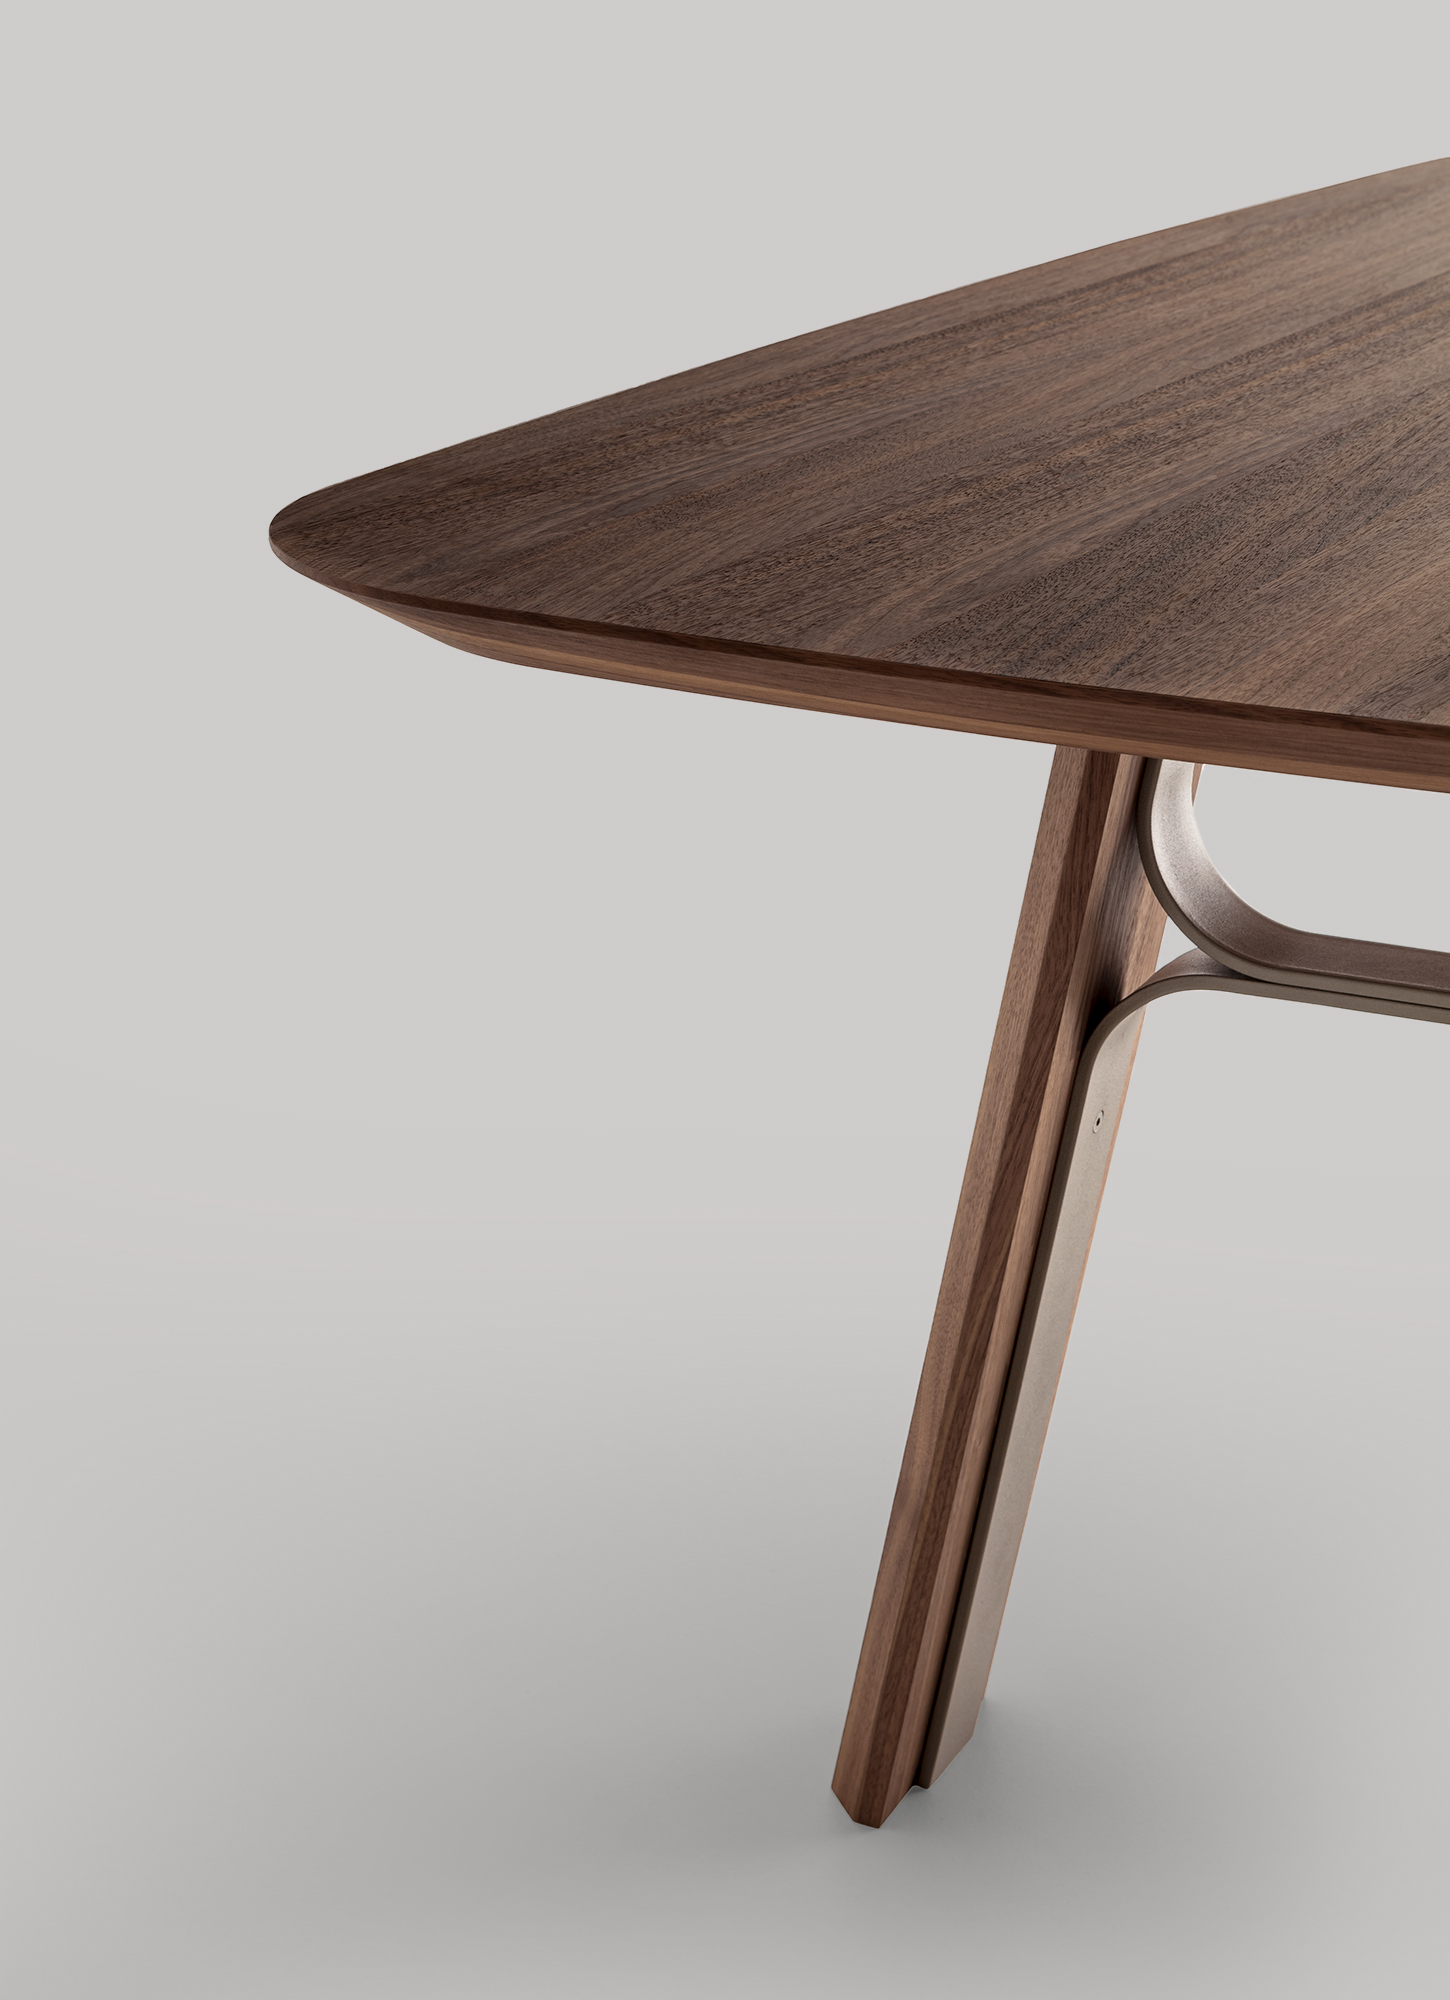 Detail of modern Bridge table in Canaletto walnut wood, brushed and finished in oil by Morica Design